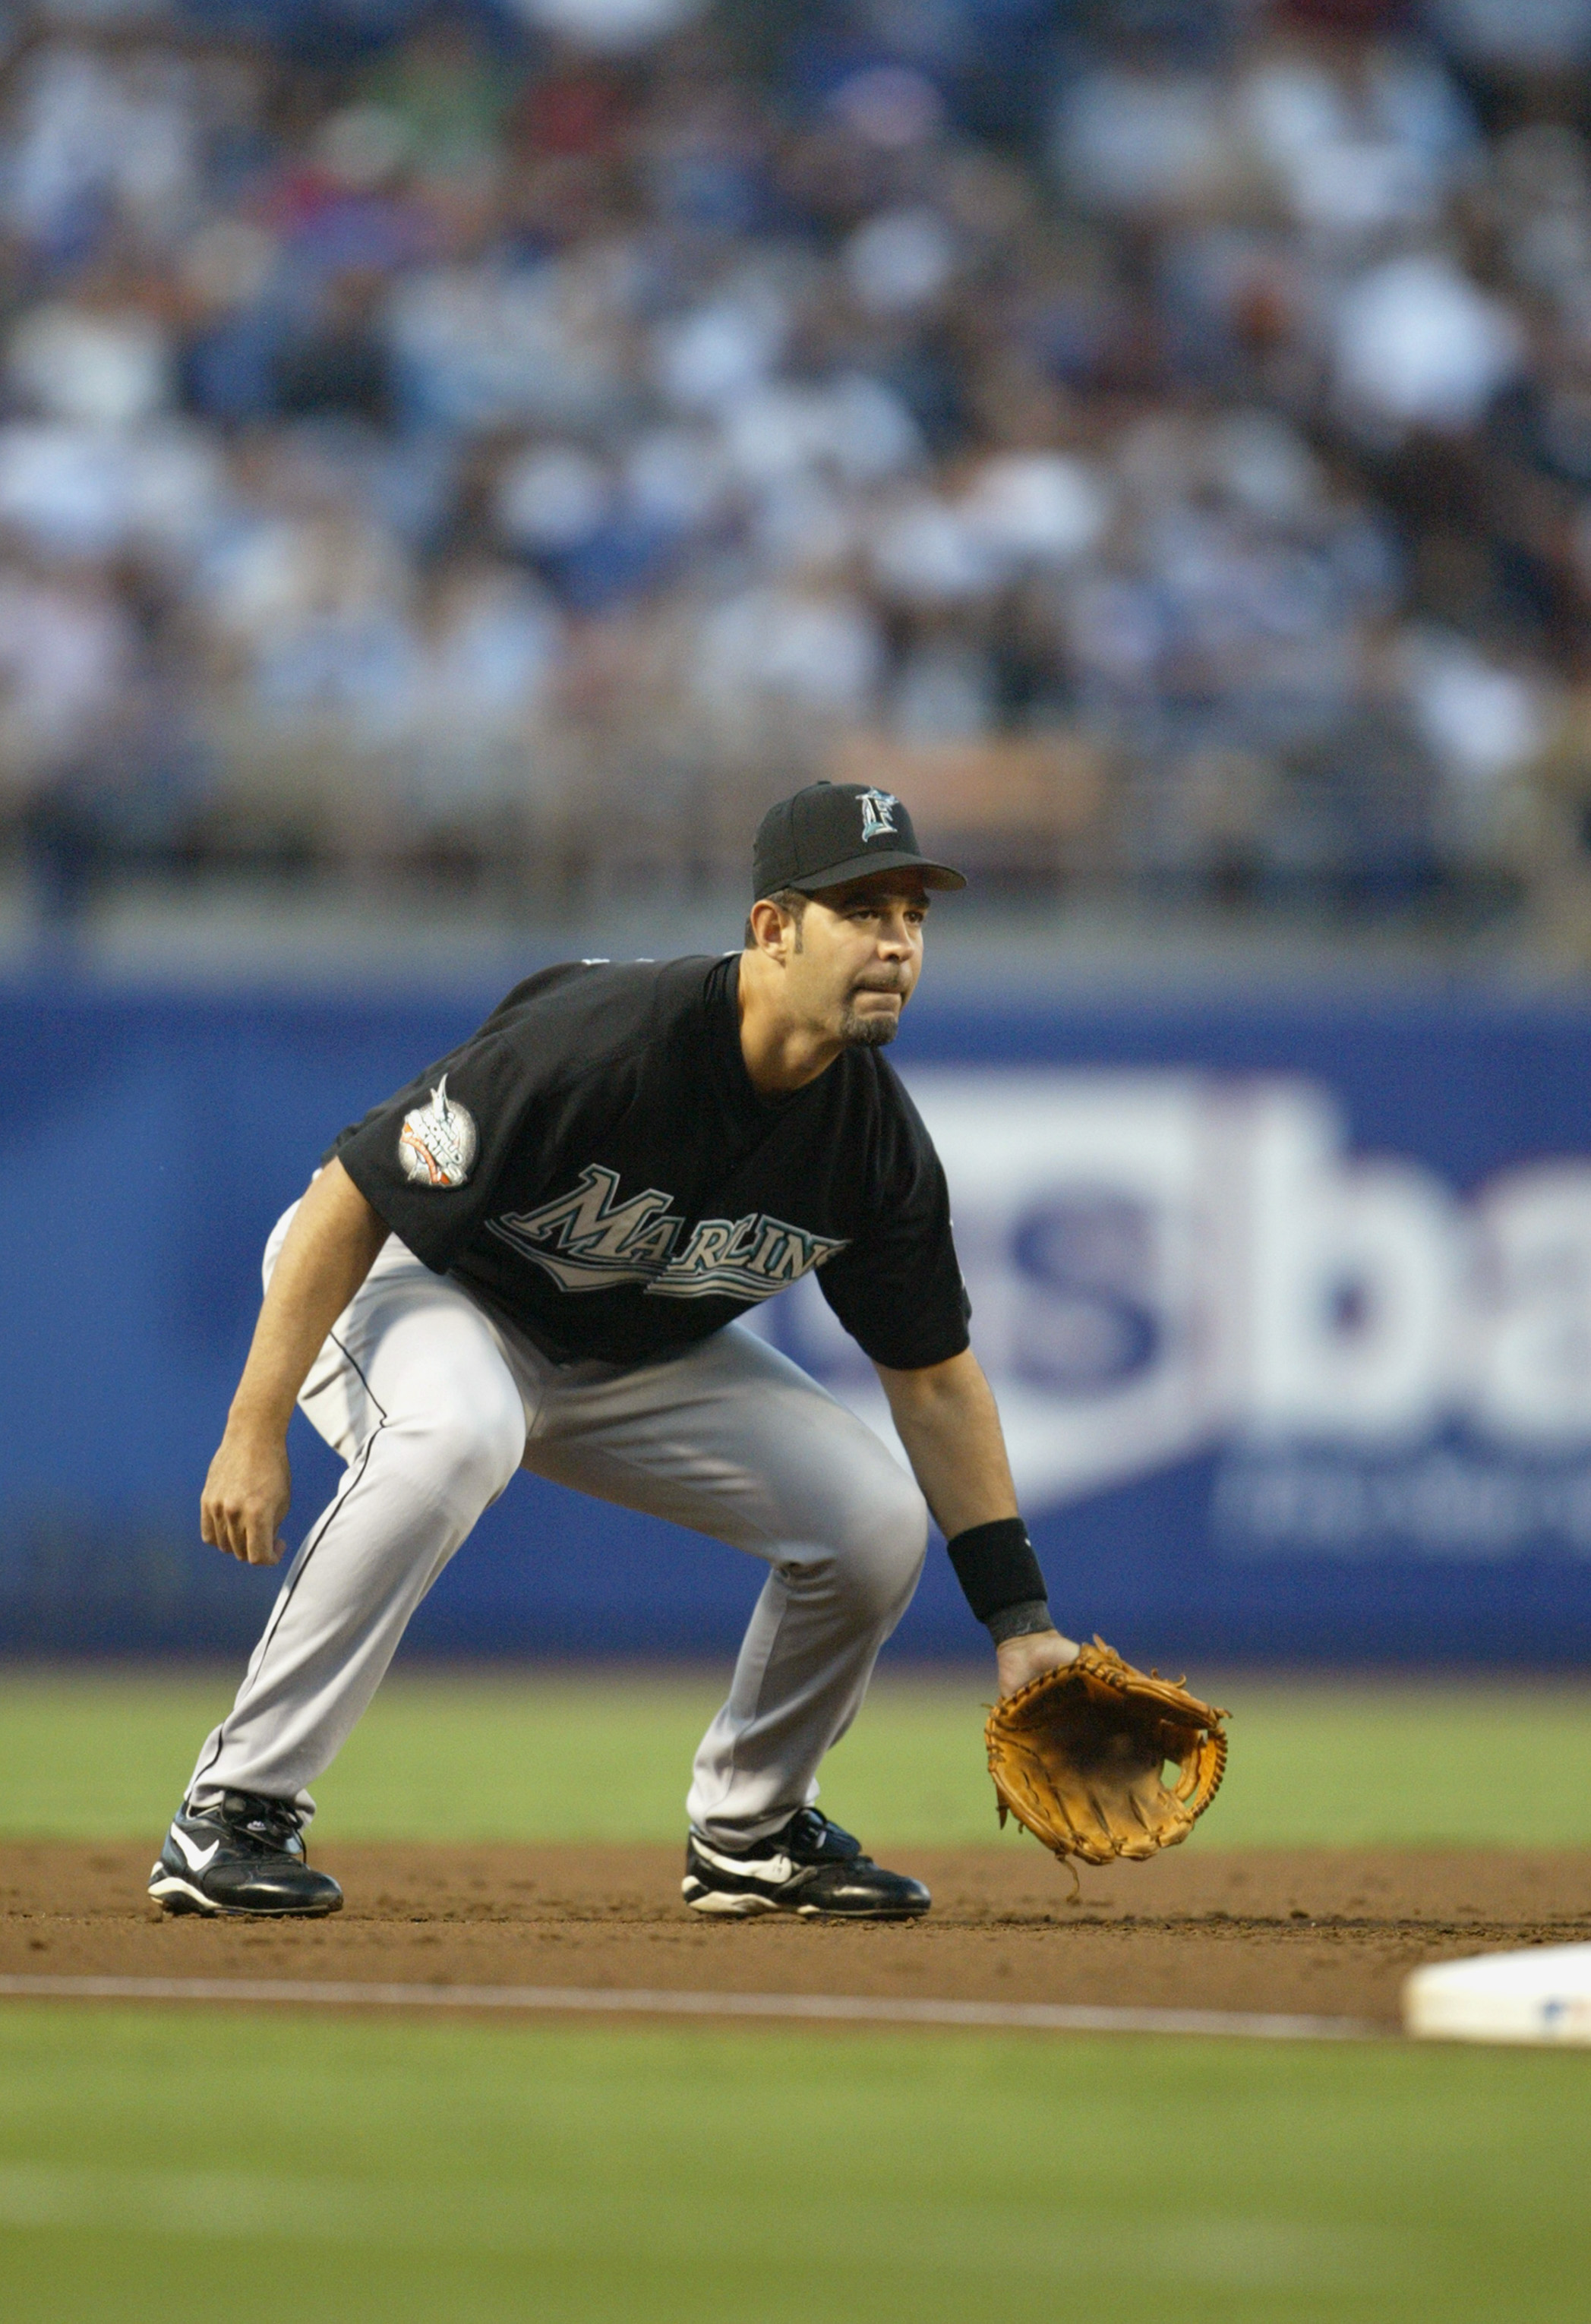 LOS ANGELES - AUGUST 17:  Infielder Mike Lowell #19 of the Florida Marlins plays defense against the Los Angeles Dodgers during the game at Dodger Stadium on August 17, 2004 in Los Angeles, California. The Dodgers won 6-1. (Photo by Jeff Gross/Getty Image